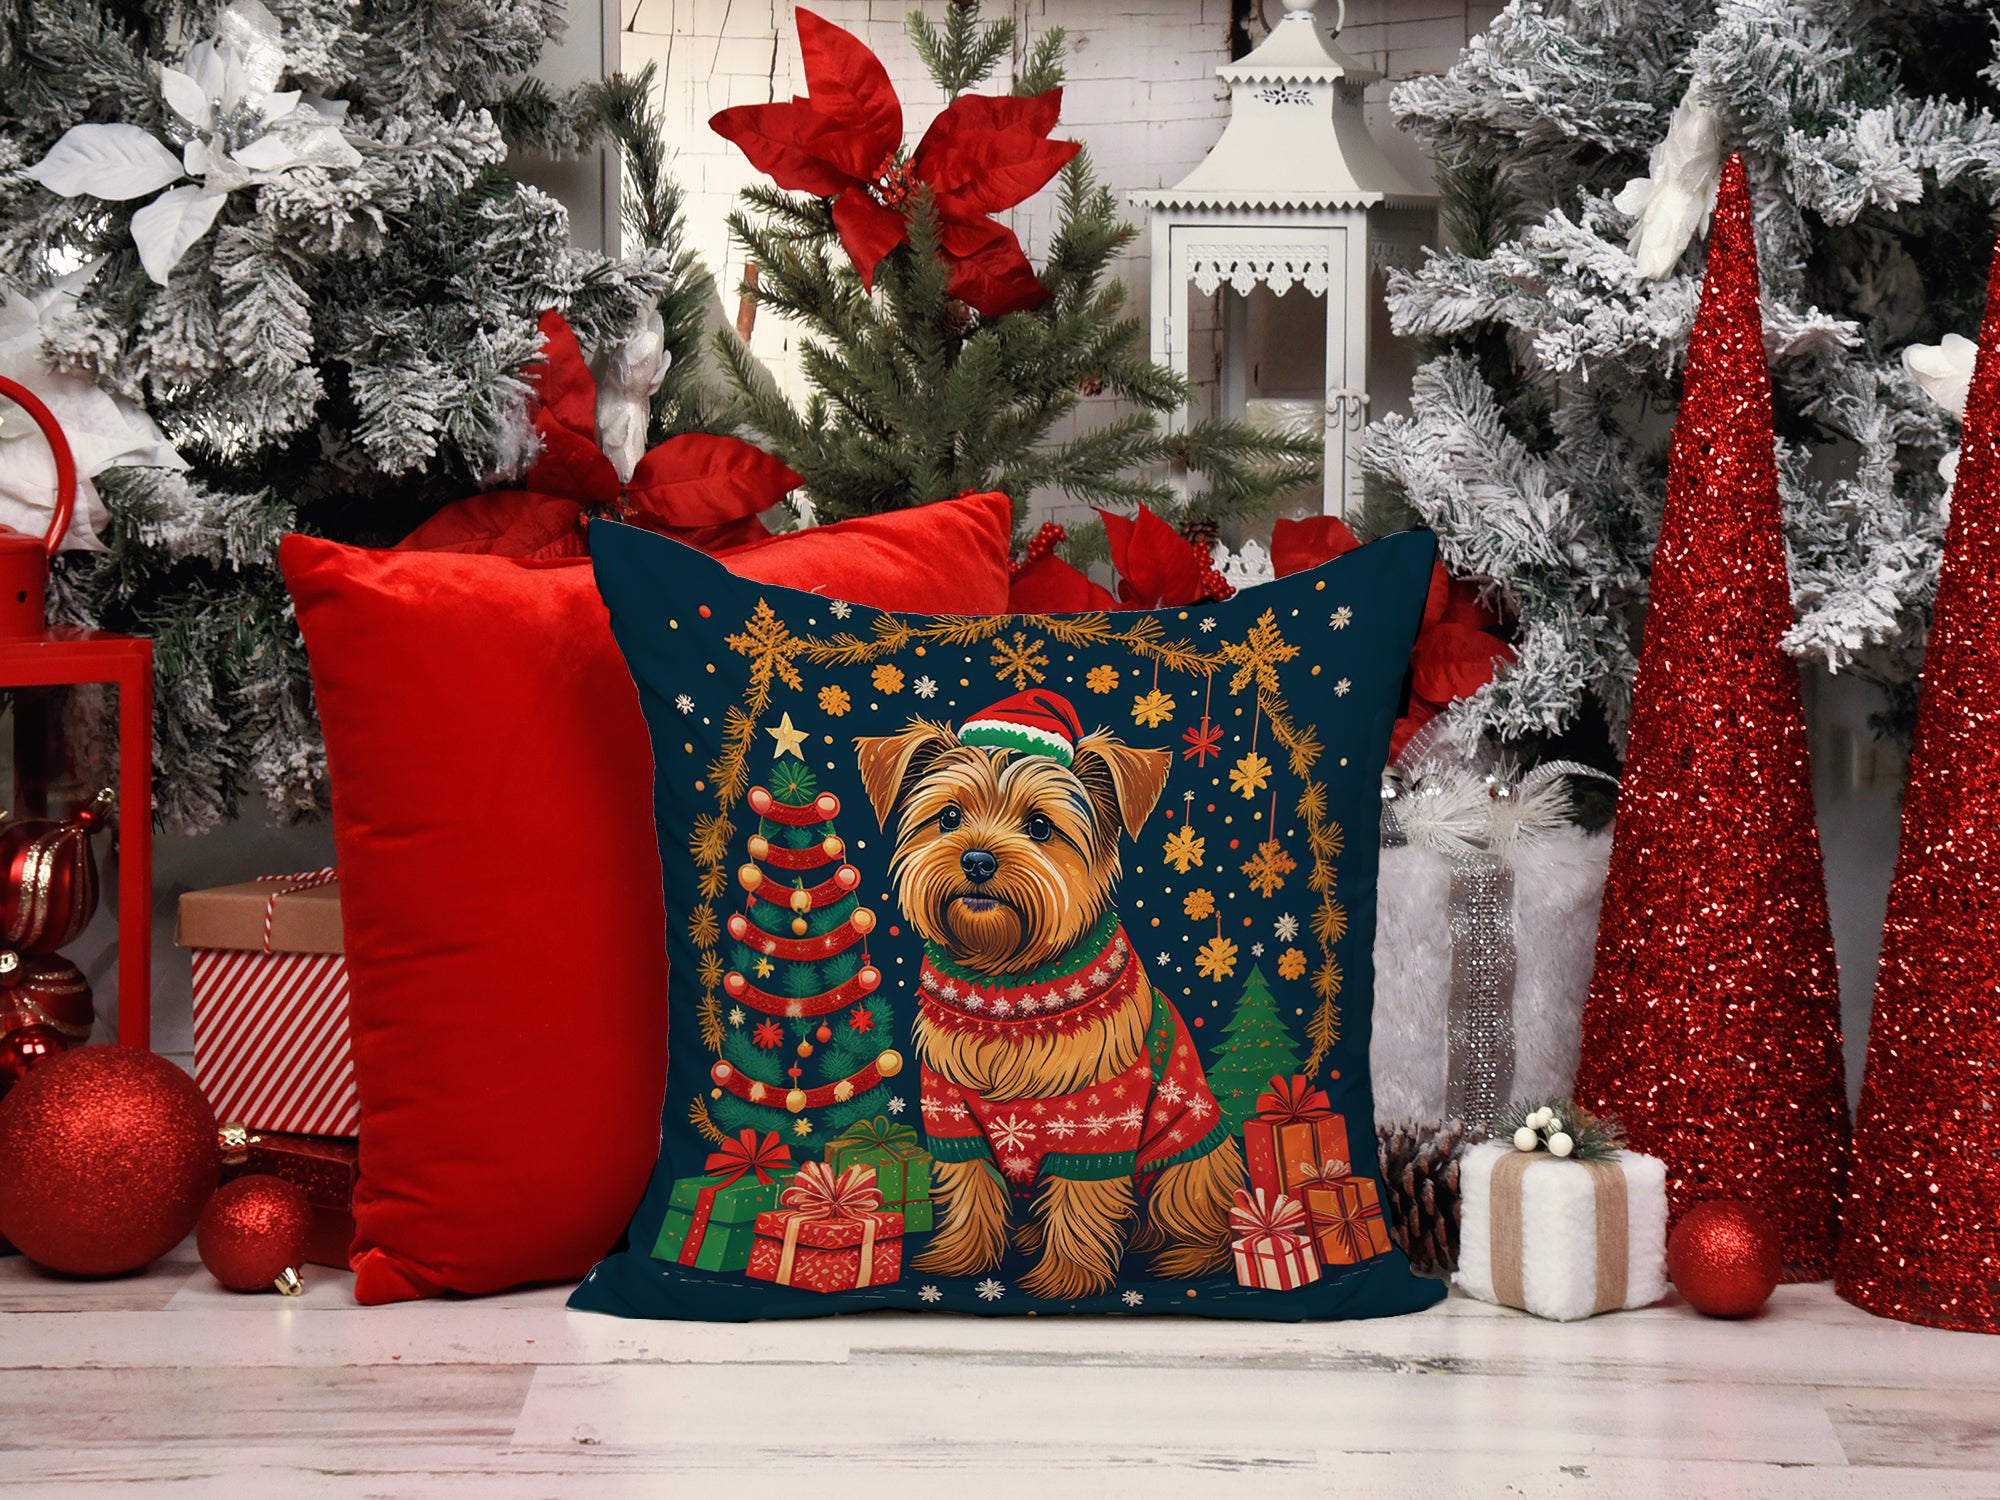 Buy this Norfolk Terrier Christmas Fabric Decorative Pillow